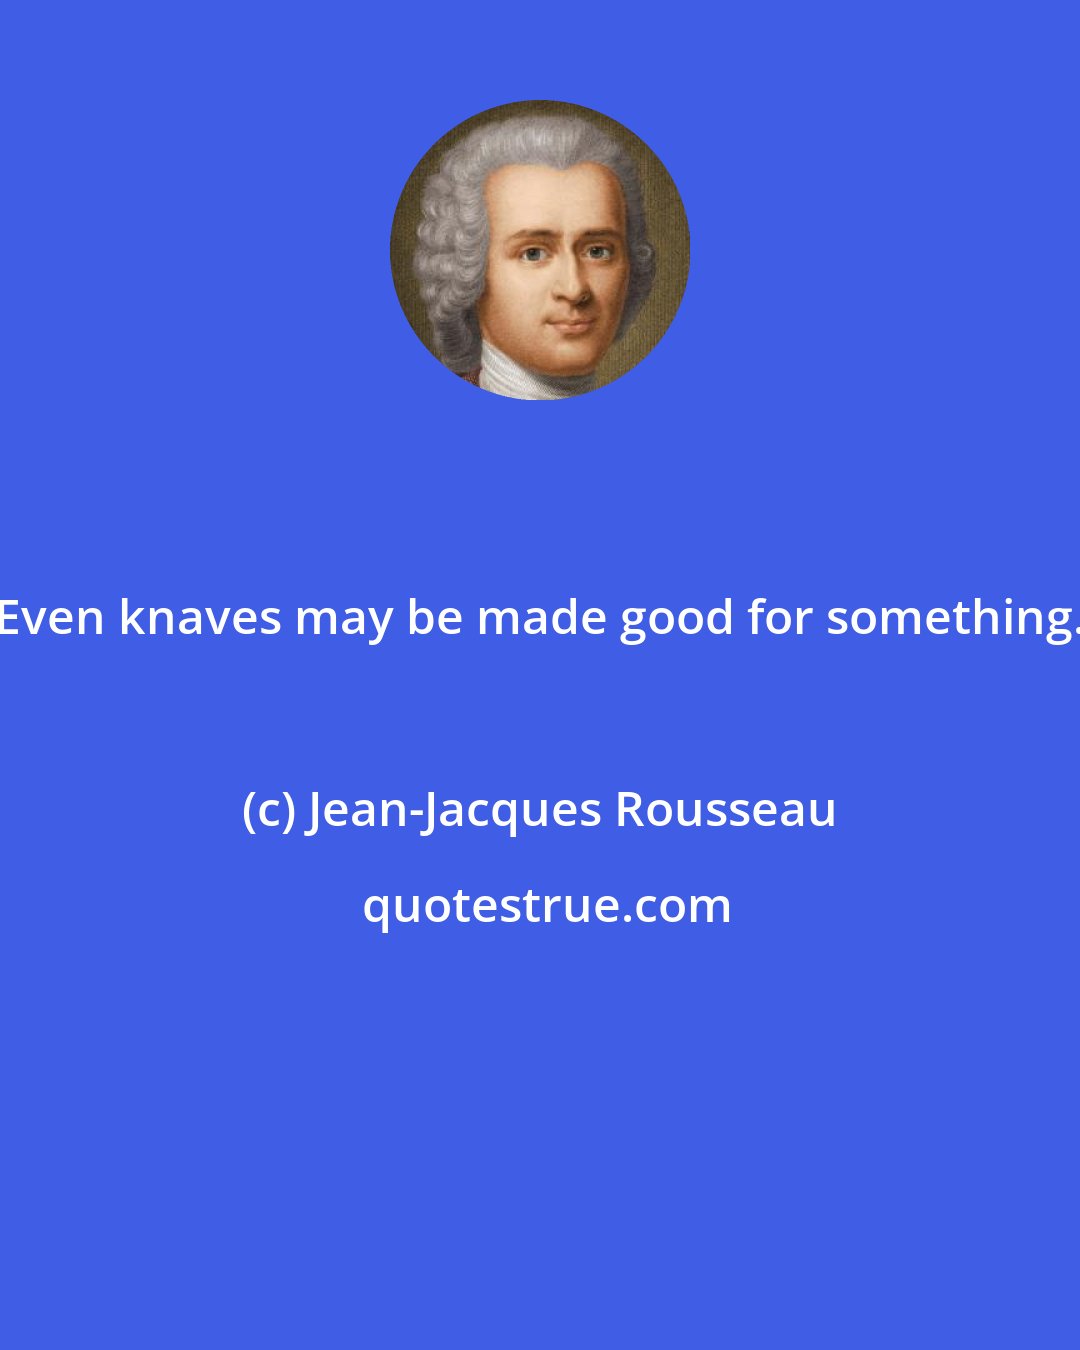 Jean-Jacques Rousseau: Even knaves may be made good for something.